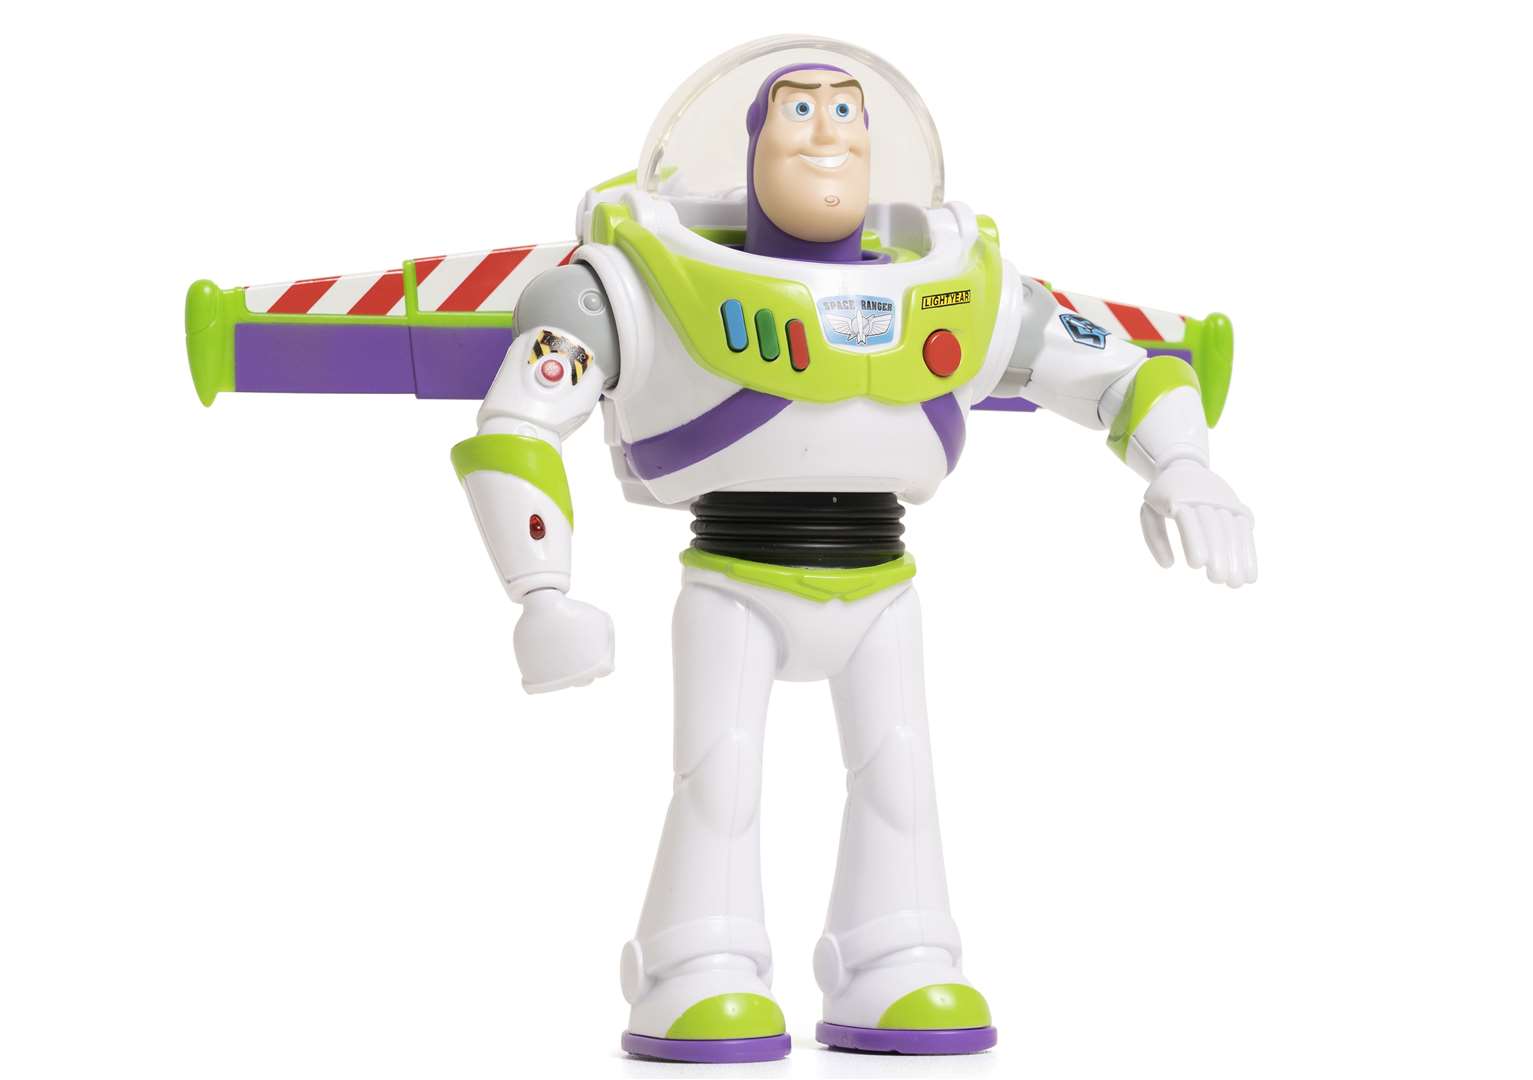 Buzz Lightyear is predicted to be popular following the release of Toy Story 4